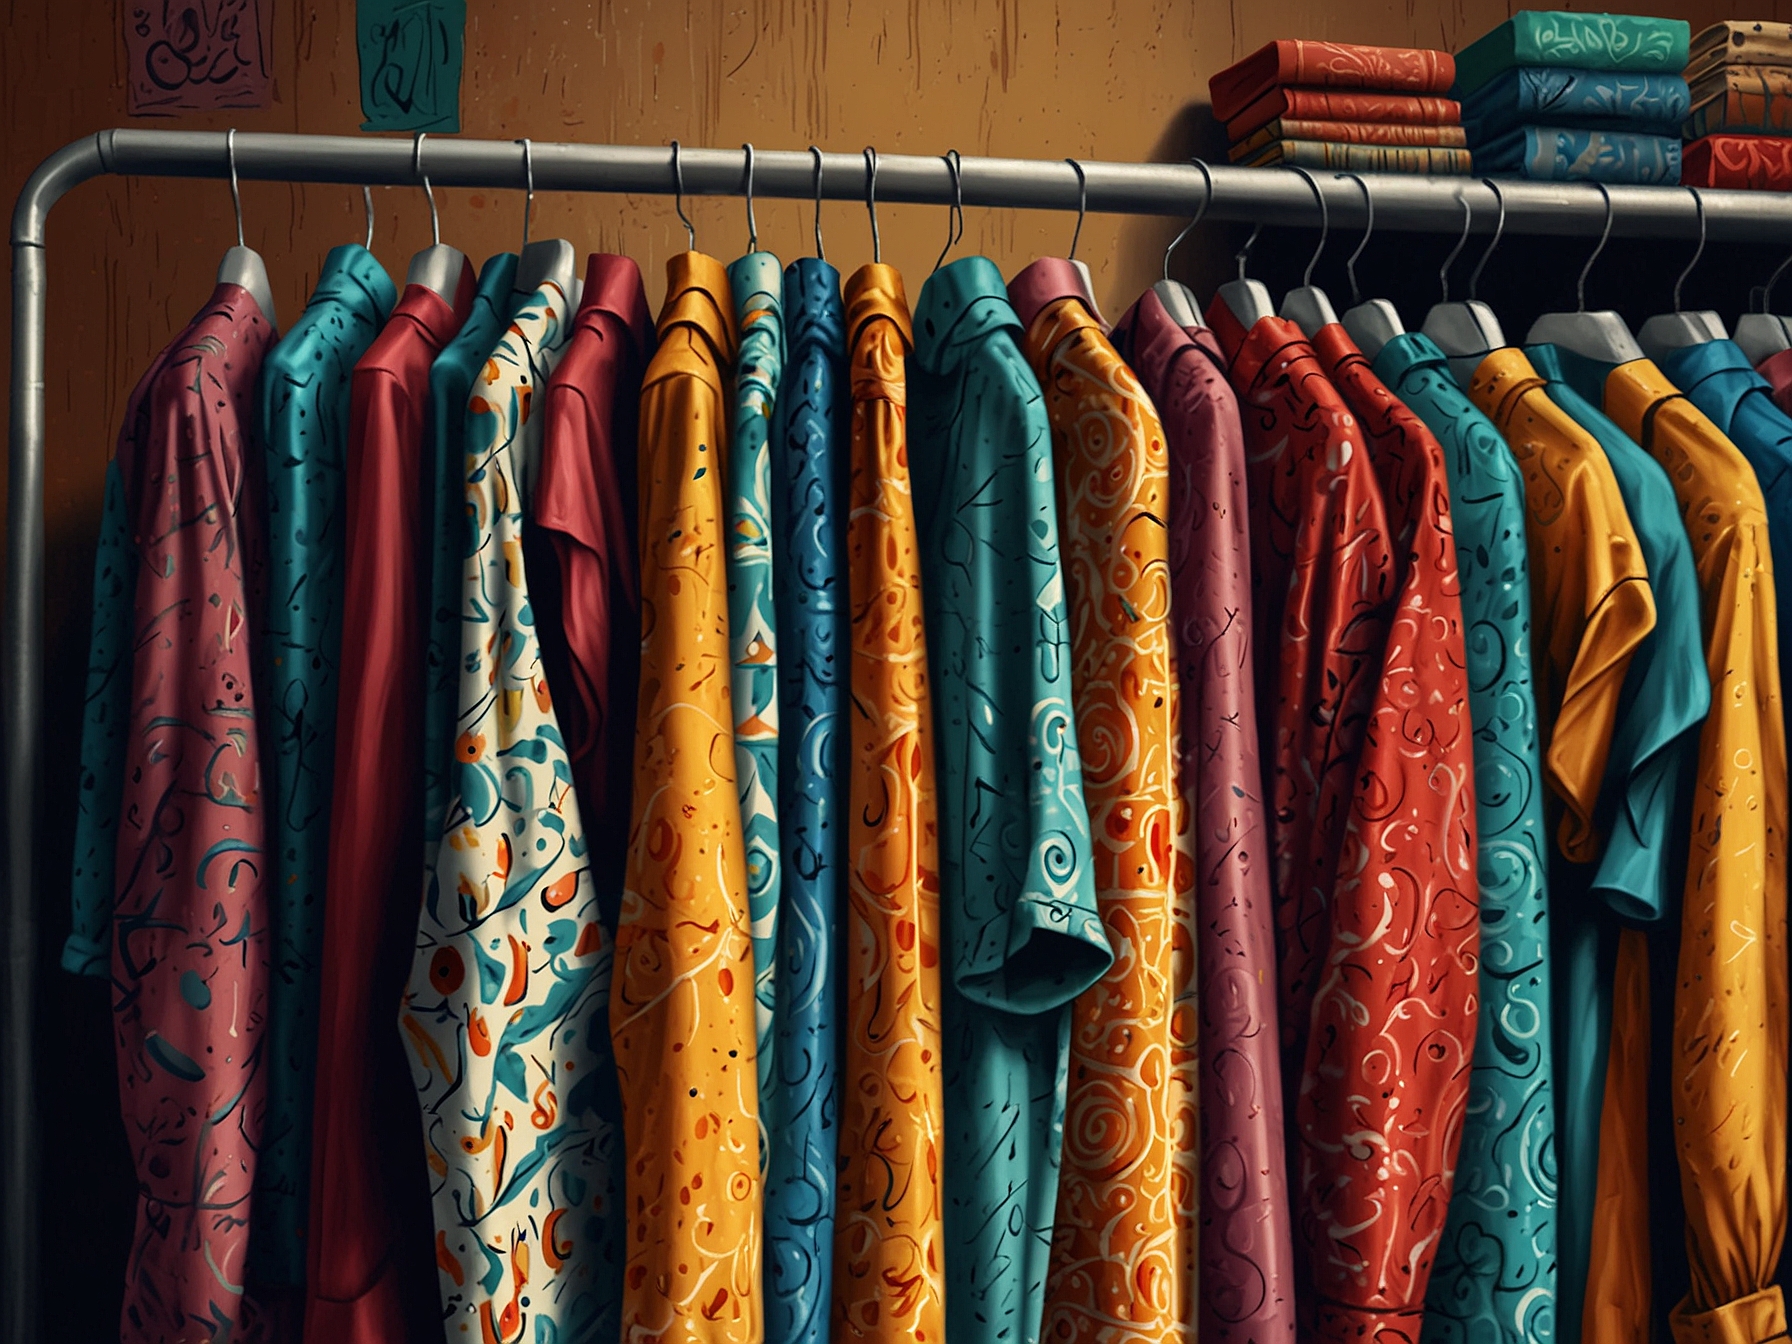 A vibrant, vintage-style shirt with distinctive patterns hanging on a charity shop rack, nestled between various retro clothes, representing the surprising find.